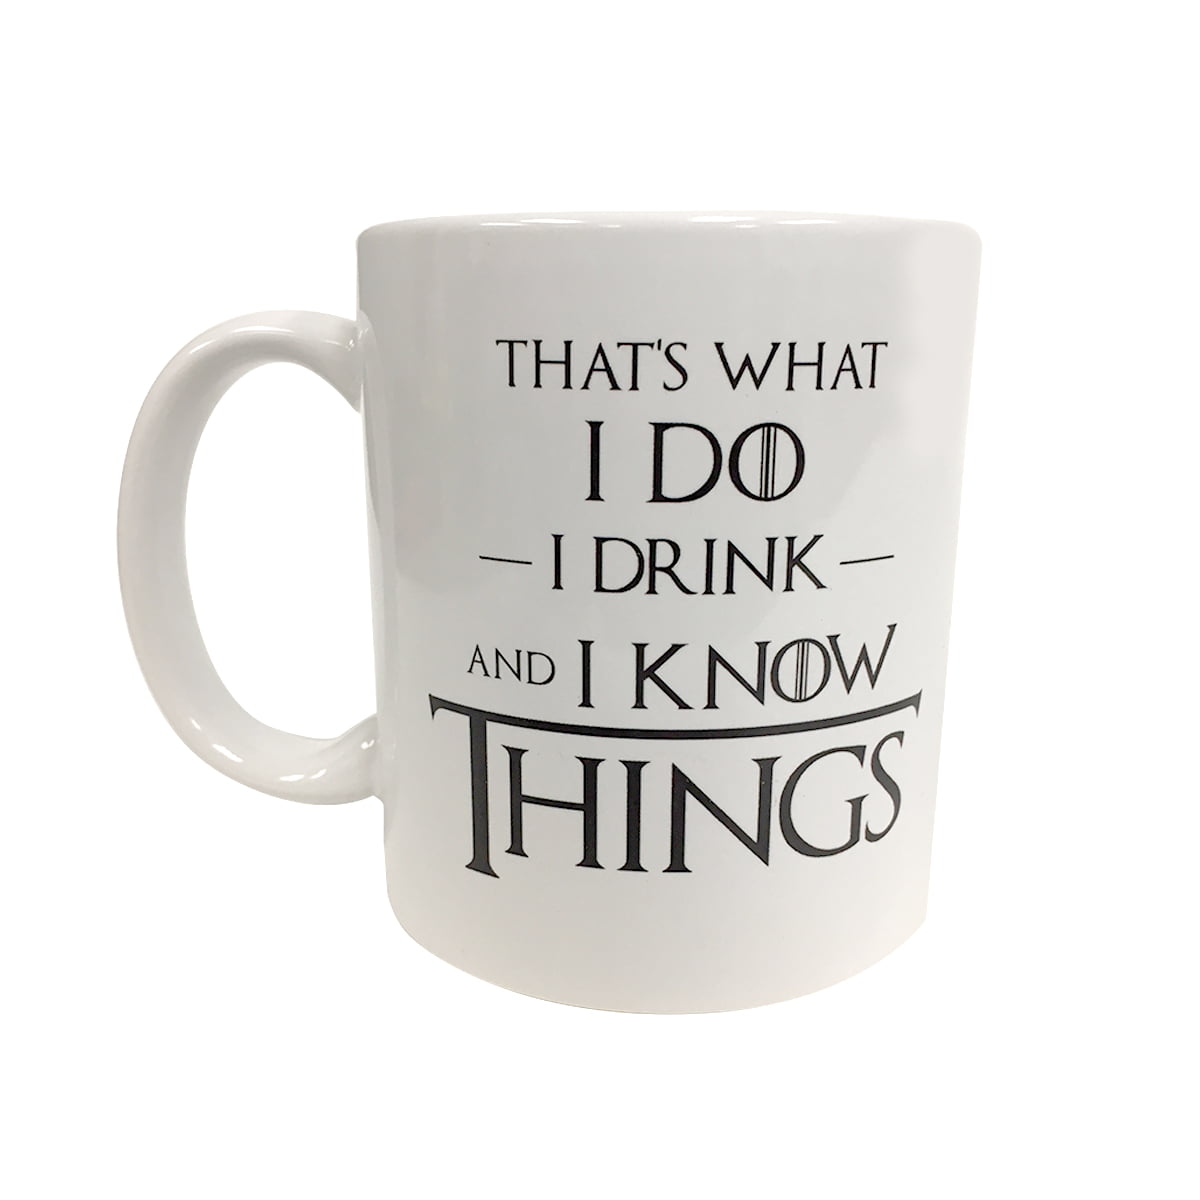 I drink and I know things Game of Thrones Mug Tyrion Lannister inspired Gift 